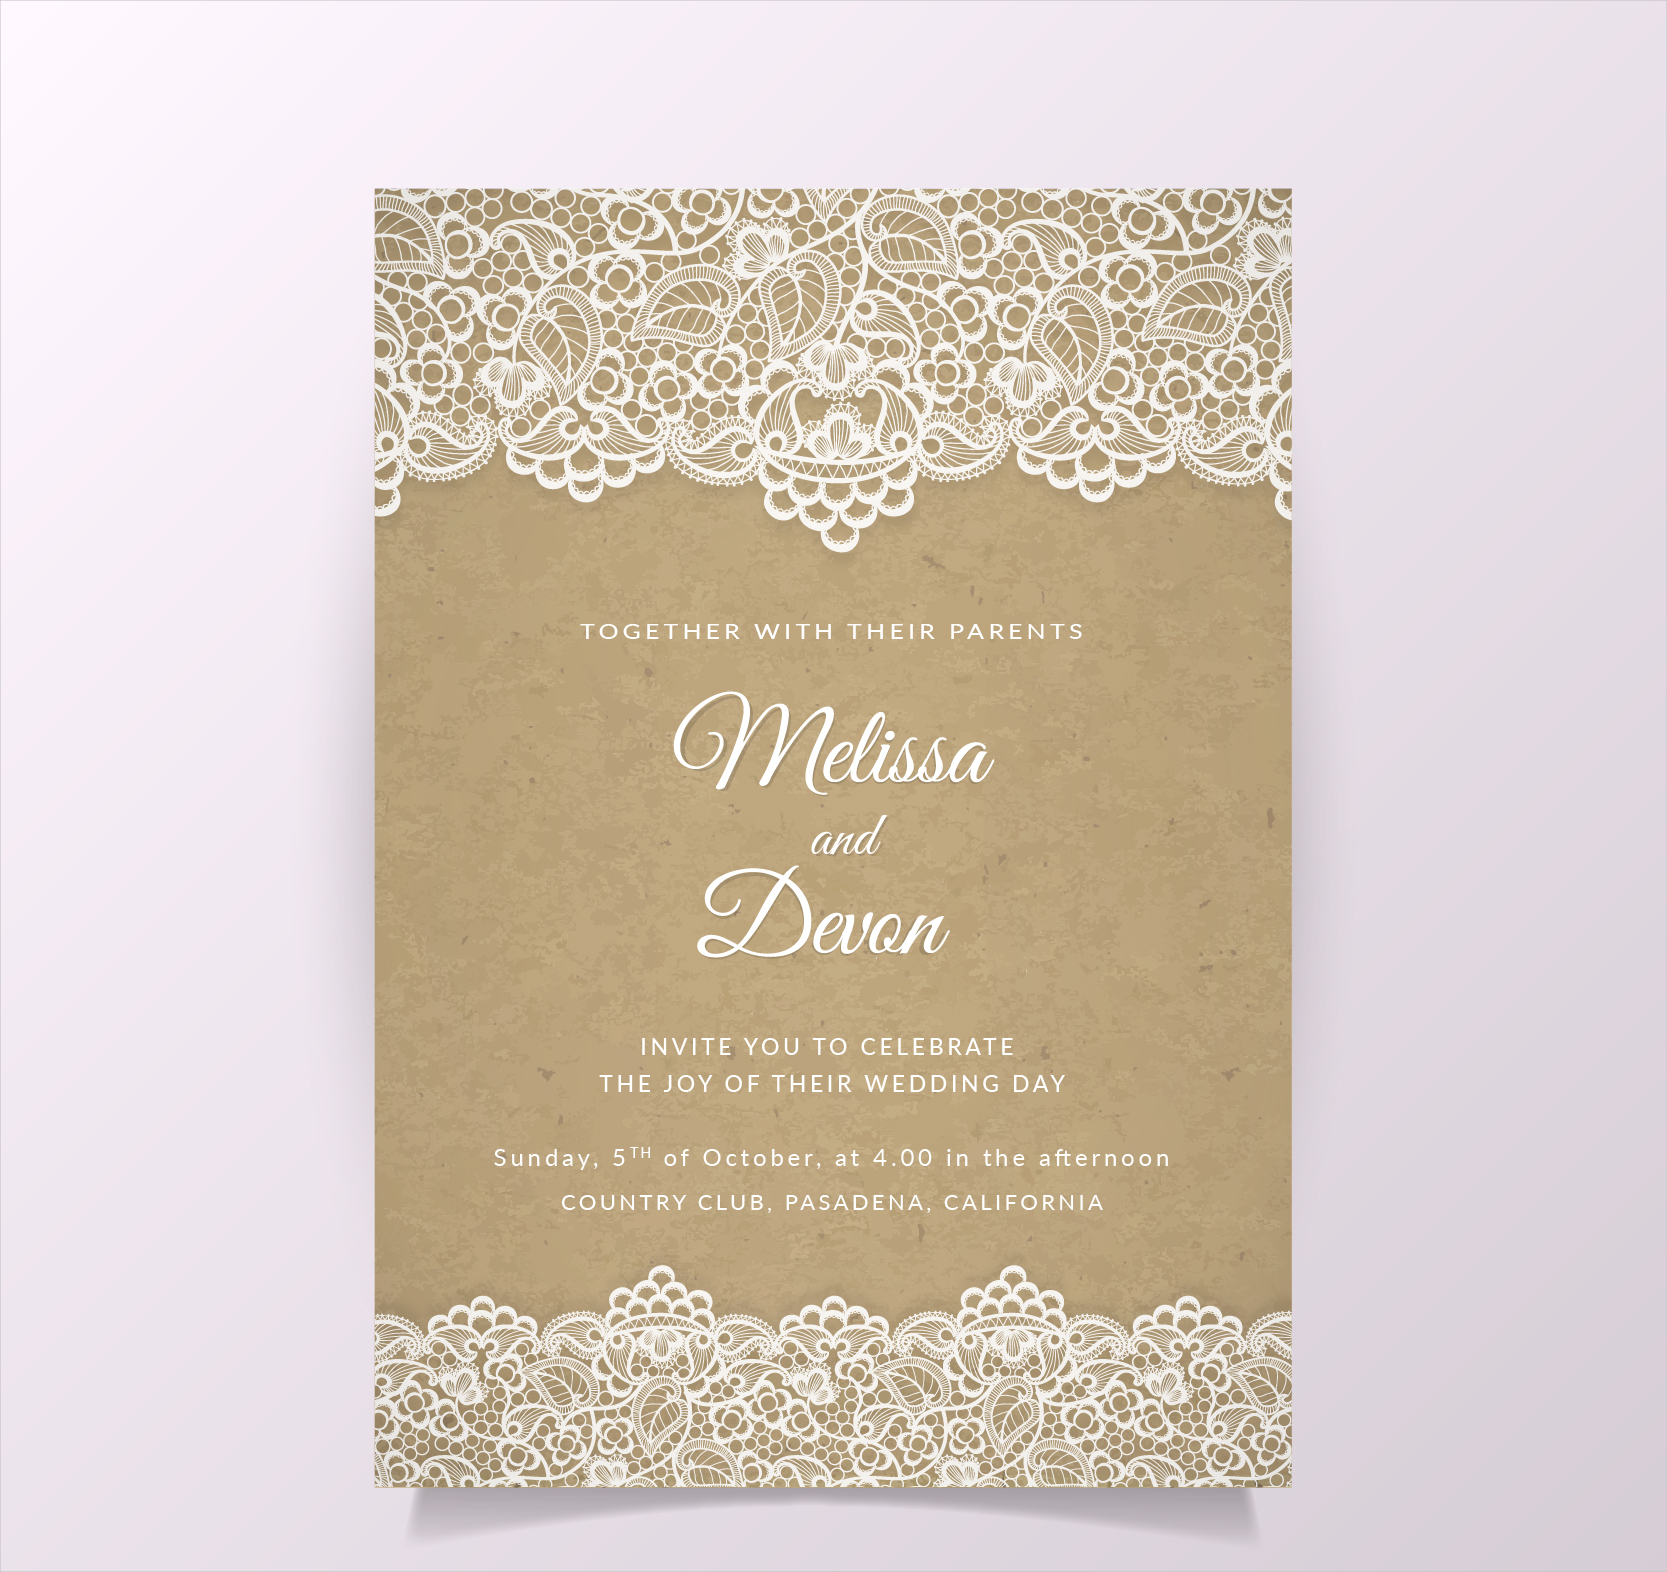 vintage wedding invitation with lace